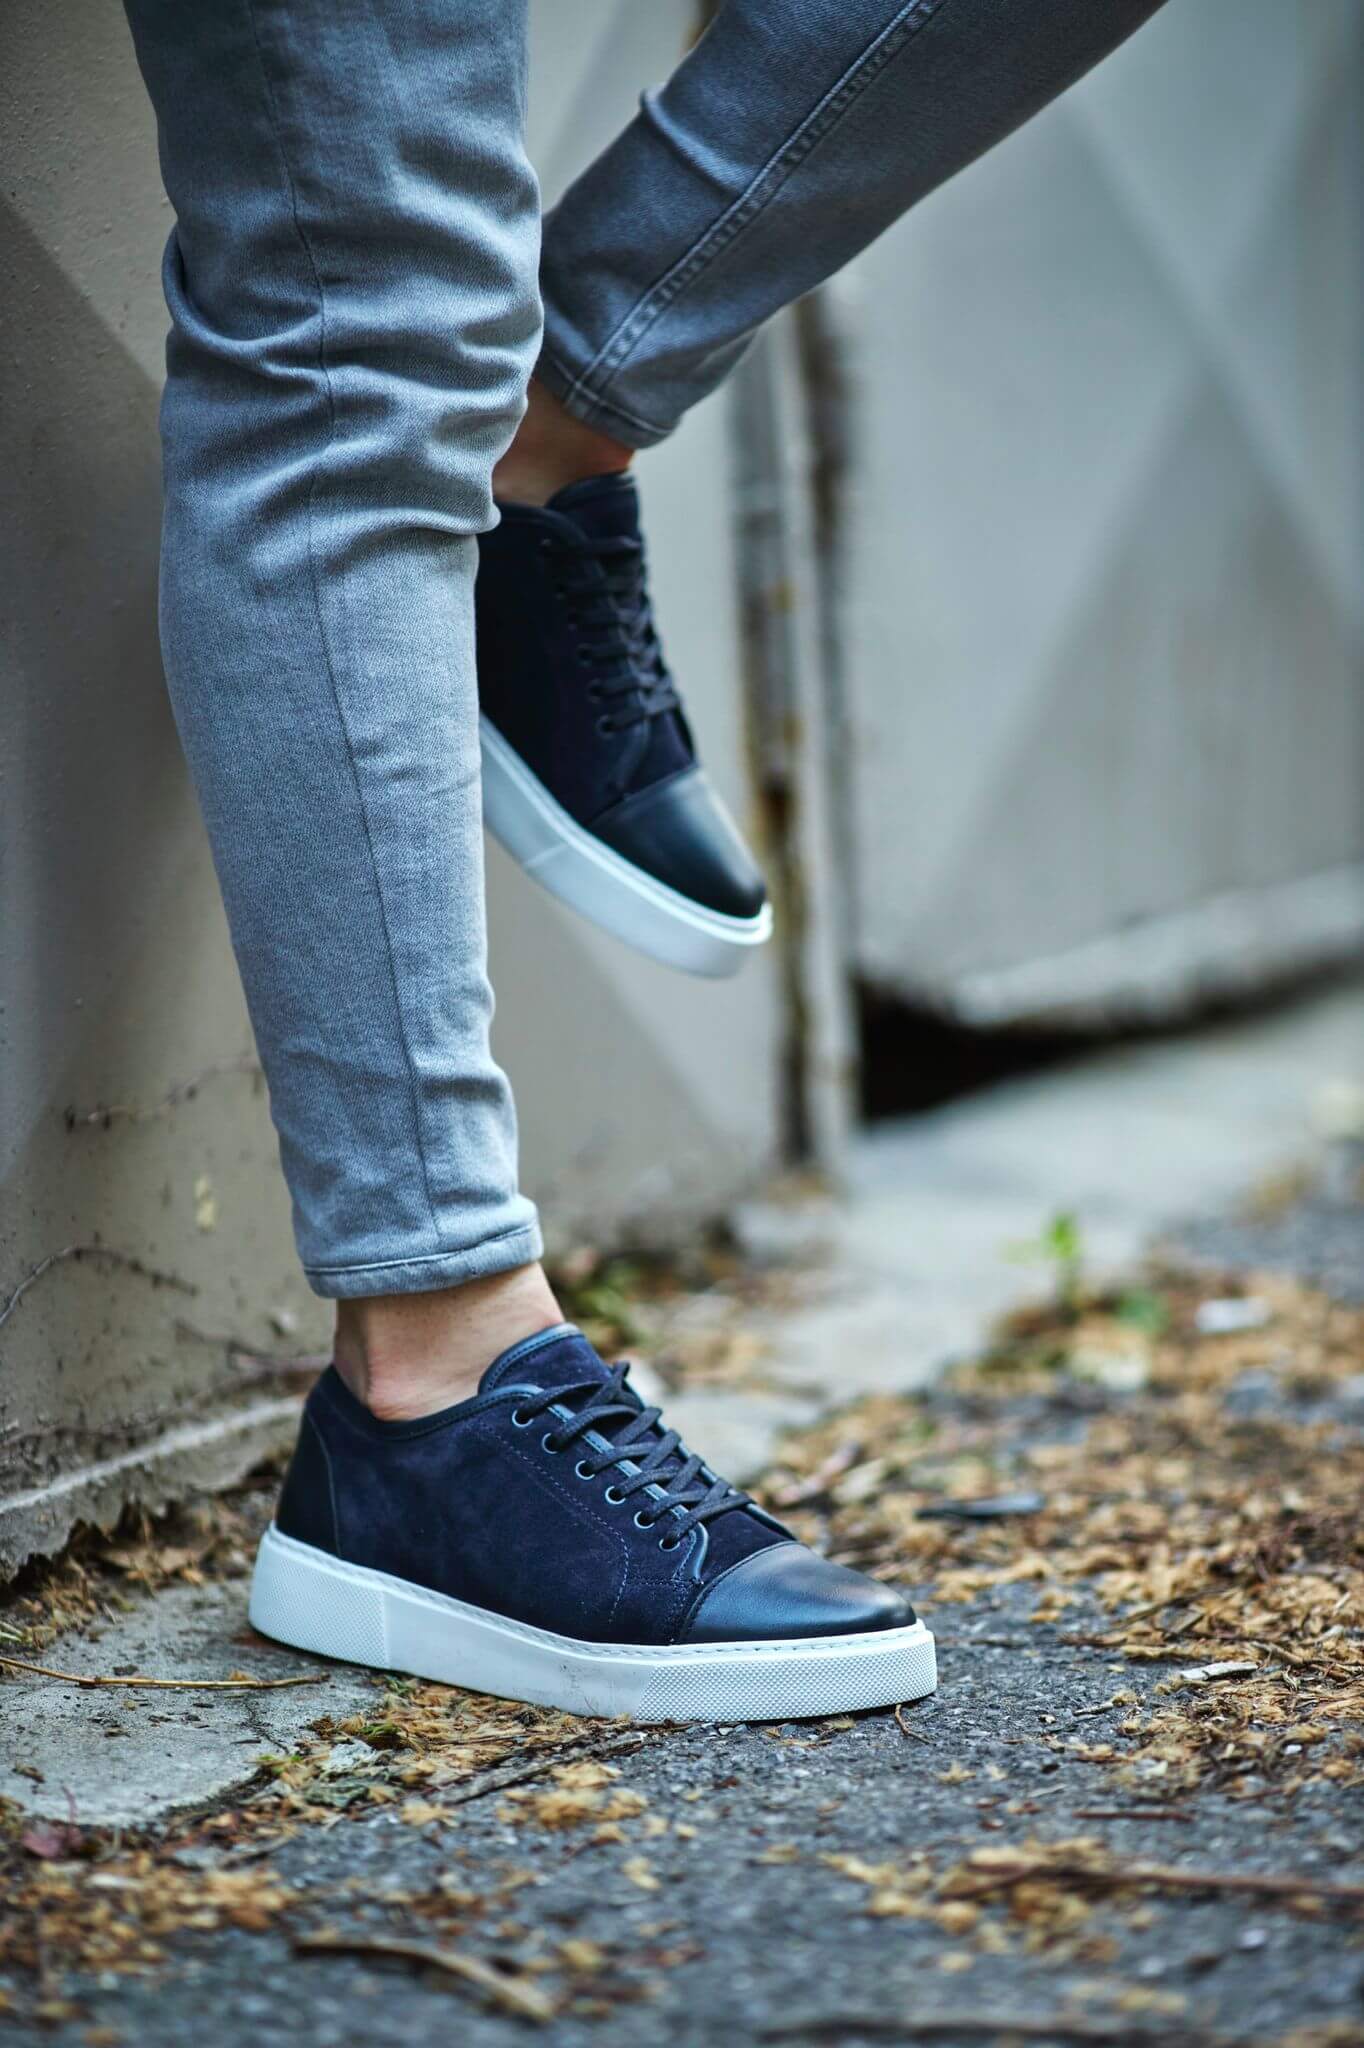 A Navy Blue Lace up Sneaker on display.